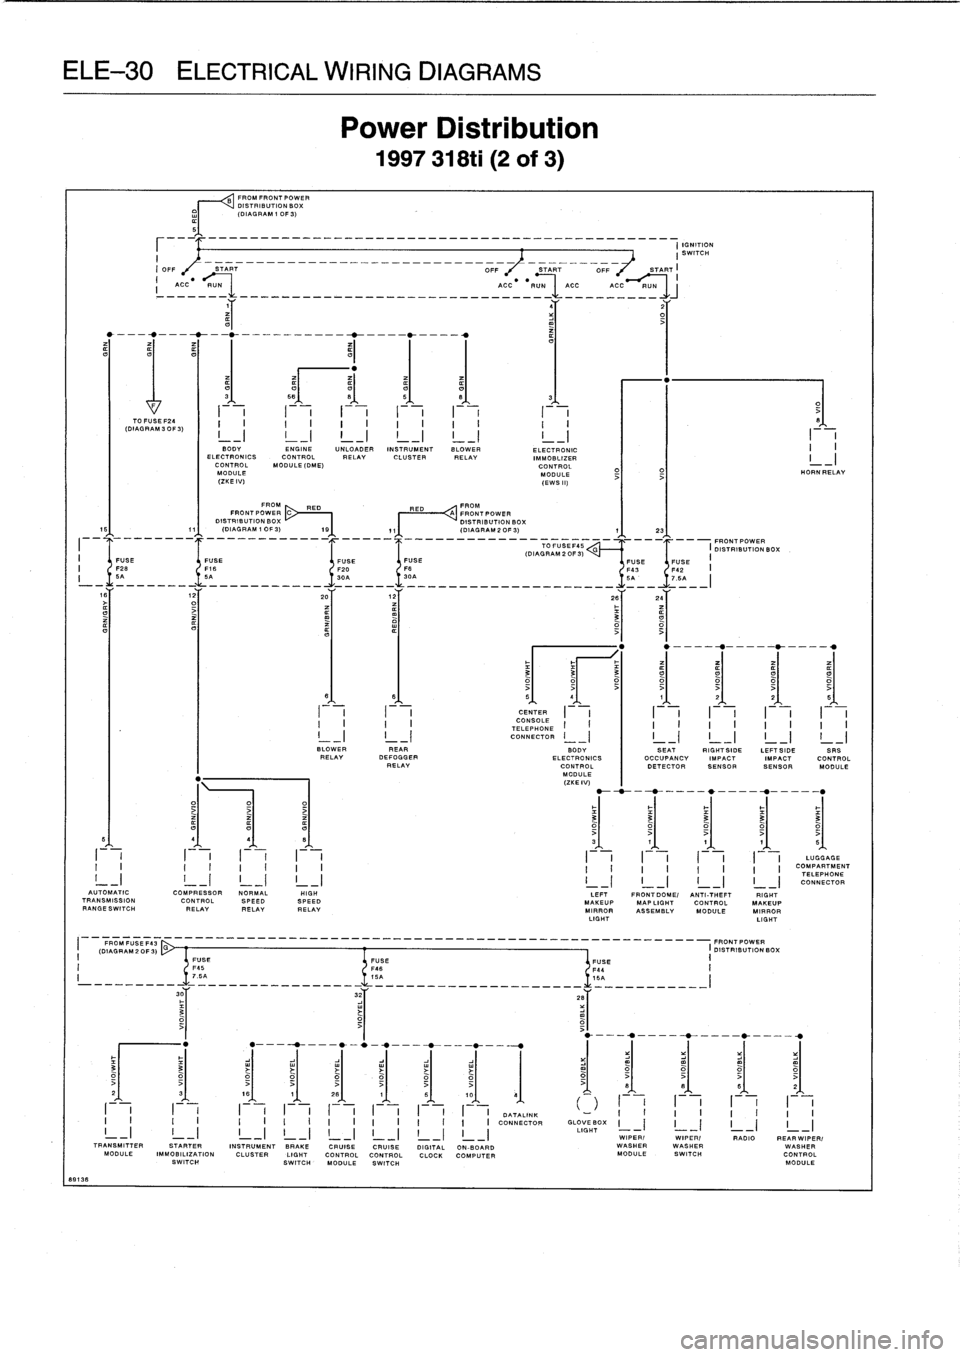 BMW 328i 1997 E36 Service Manual 
ELE-30
ELECTRICAL
WIRING
DIAGRAMS

I
ACC
-R=_
____-____-______________
ACC
-
RUN

	

ACC
-_-C~

4Y

	

2Y

I

	

I

TO
FUSE
F24
(DIAGRAM
30F
3)

FROM
FRONT
POWER
DISTRIBUTION
BOX
(DIAGRAM
1
0F3)
IGNI